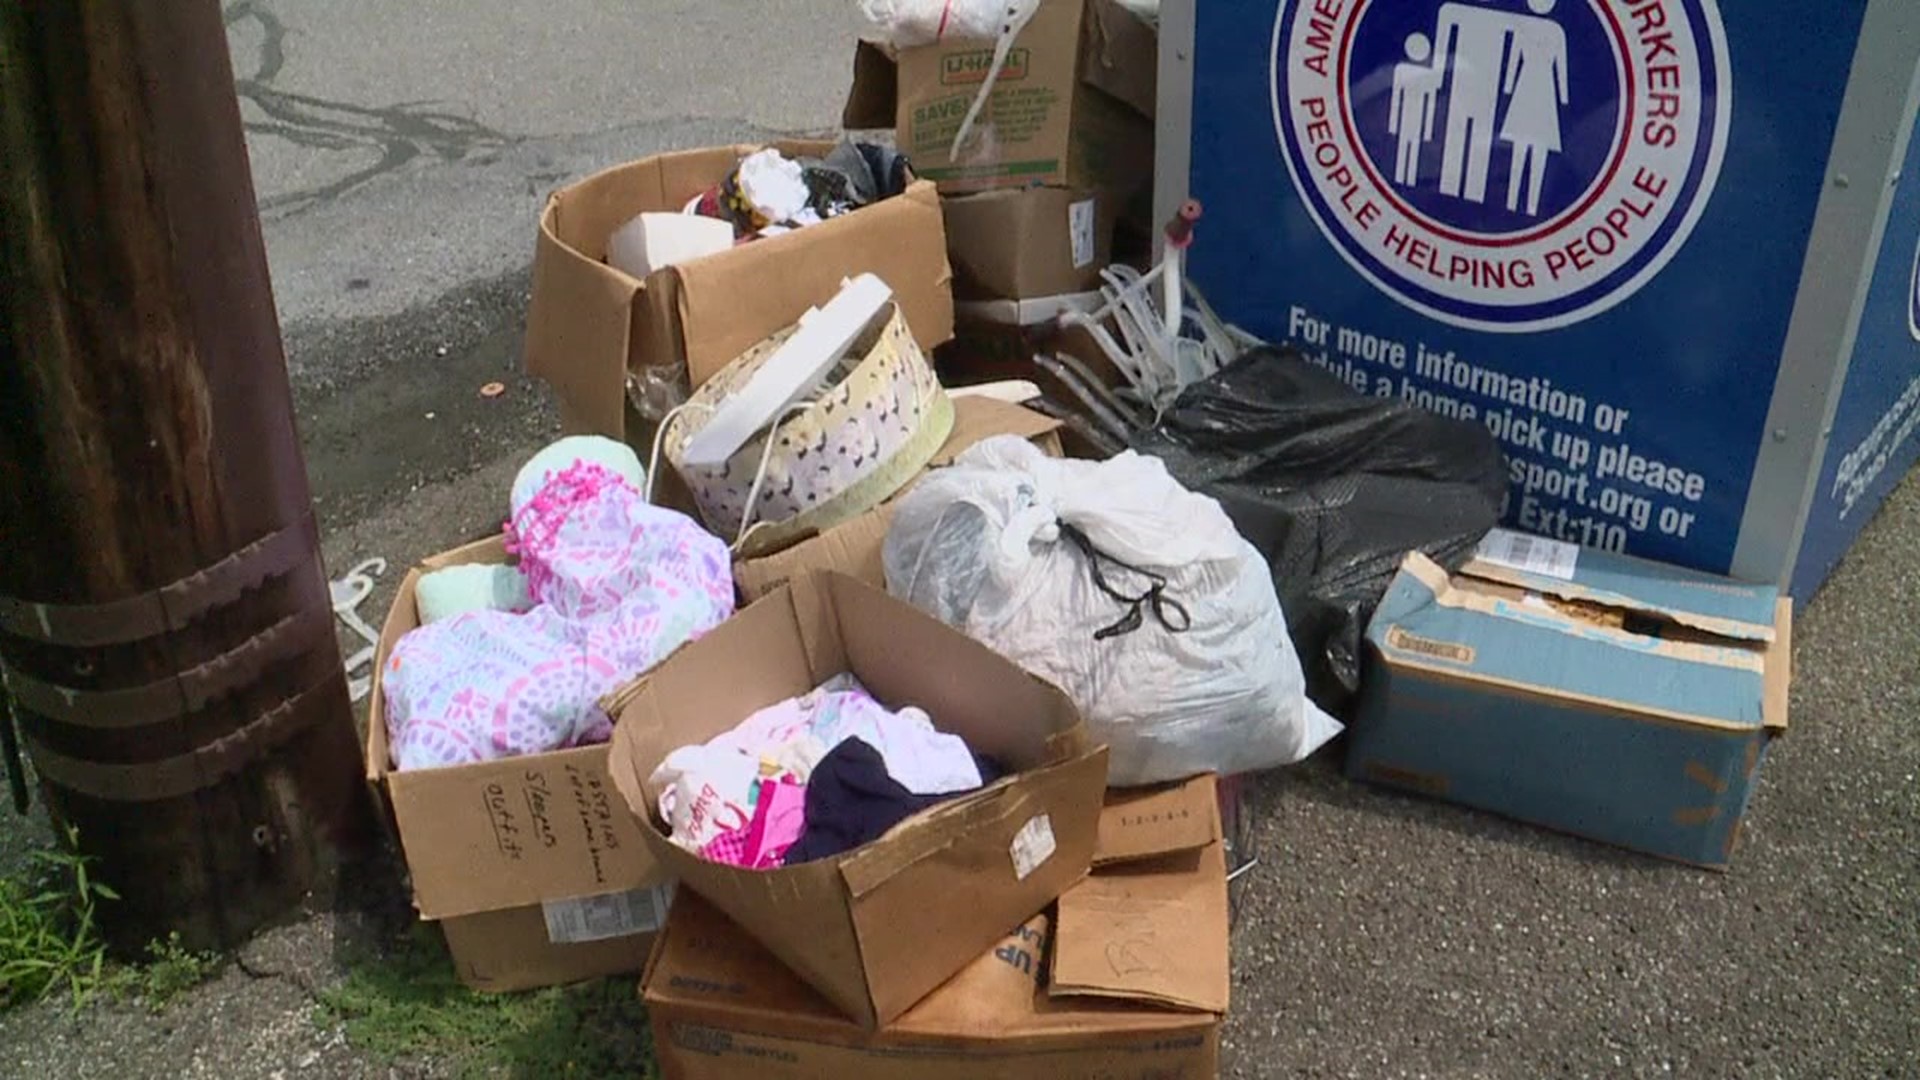 Folks in Lycoming County are leaving unwanted and hazardous items at the American Rescue Workers' collection bins.